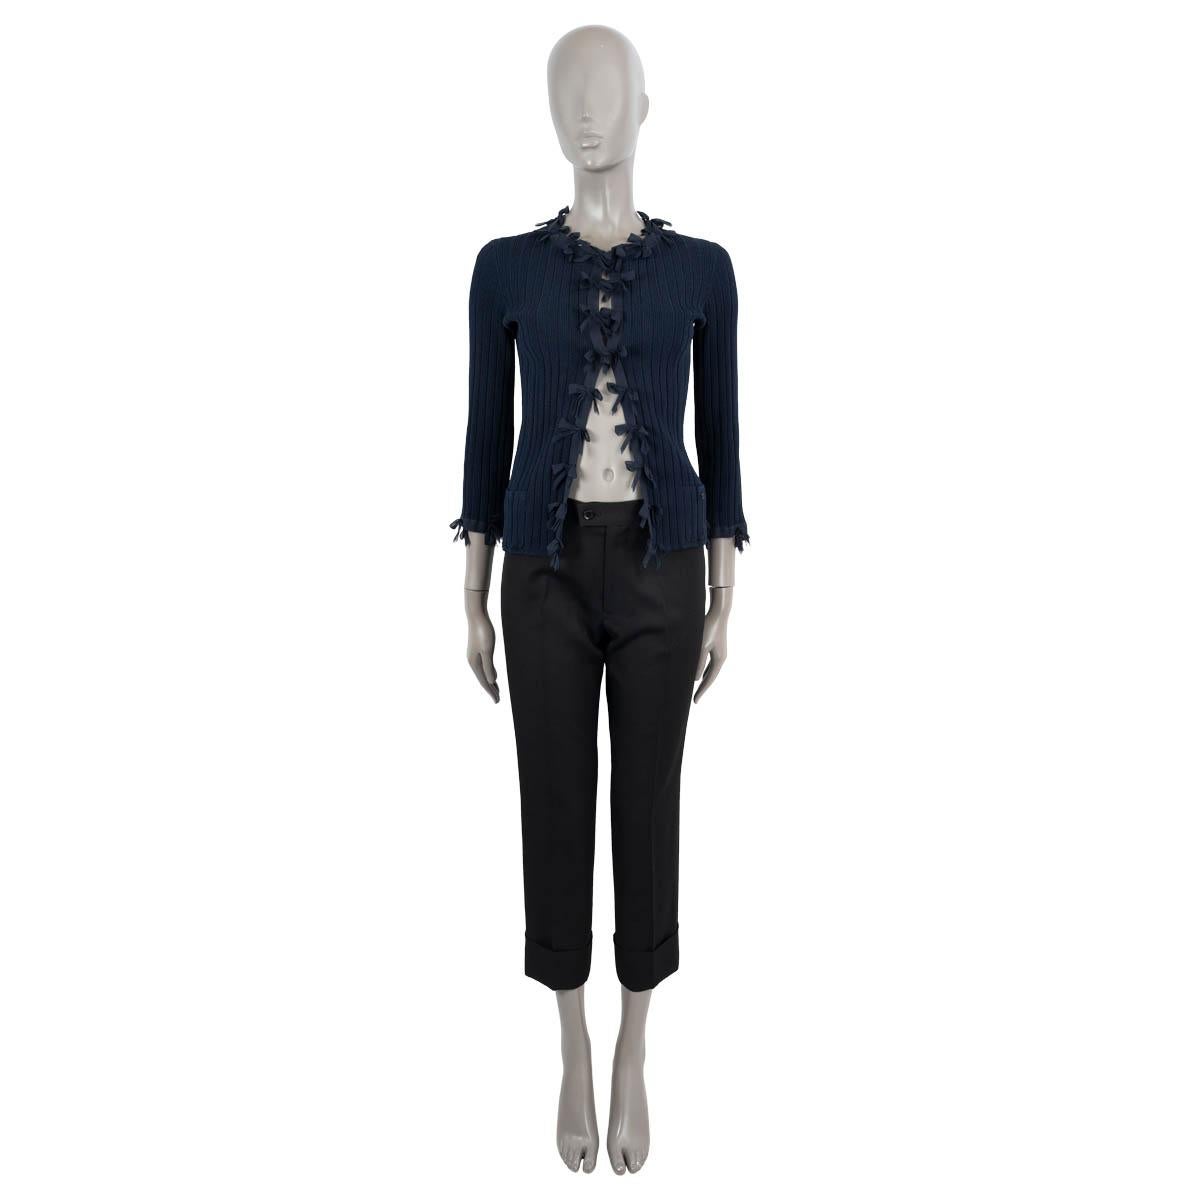 100% authentic Chanel rib-knit cardigan in navy blue viscose (76%) and elastane (24%). Features bow trim, 3/4 sleeves and patch pockets. Closes with hooks on the front. Unlined. Has been worn and is in excellent condition.

2006 Spring/Summer